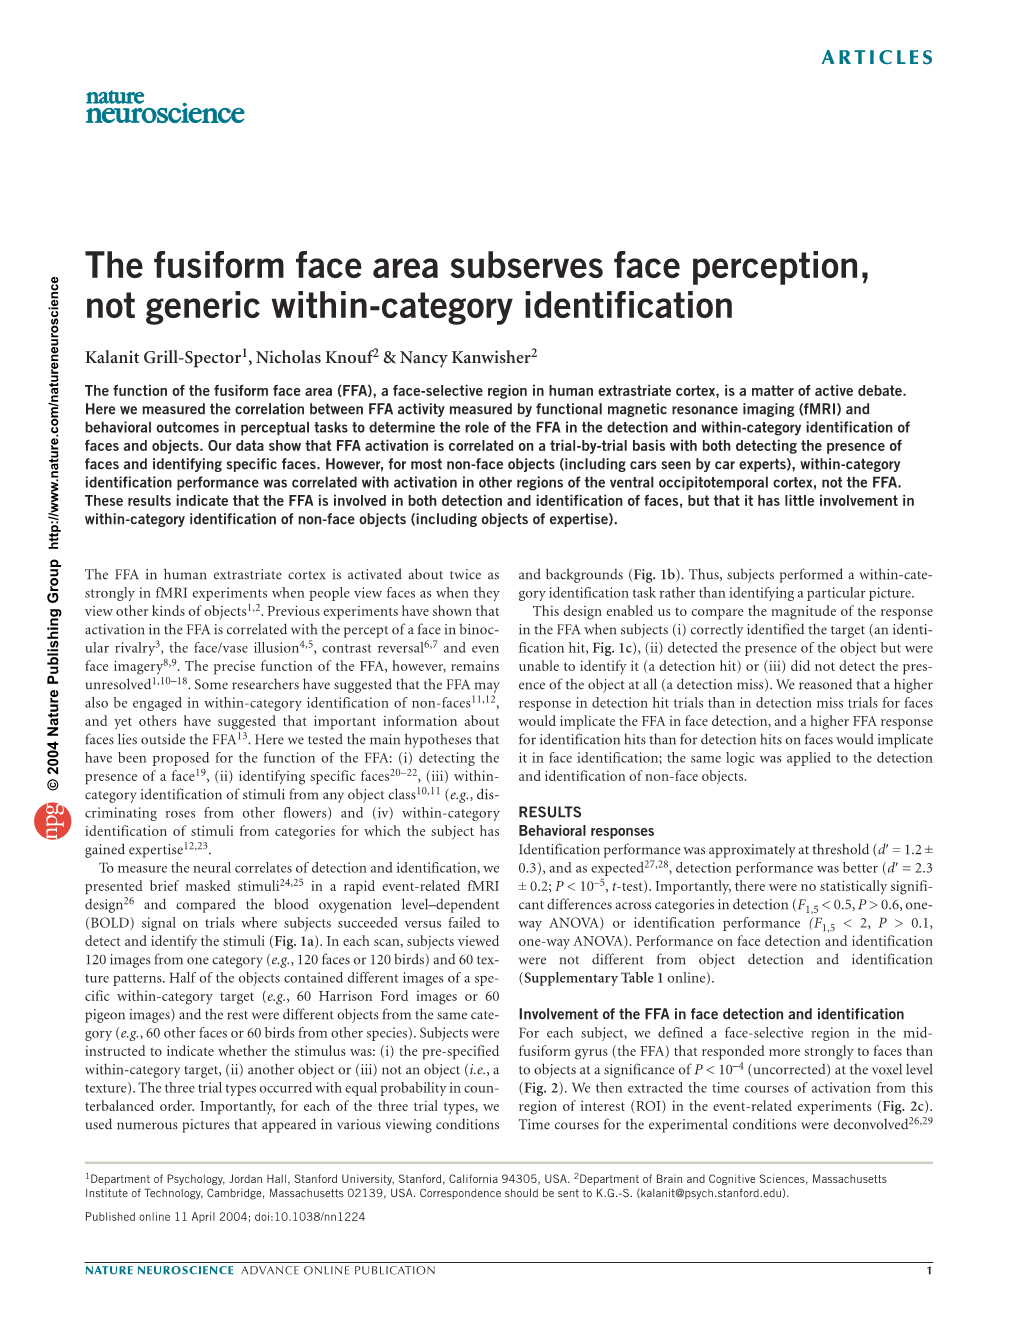 The Fusiform Face Area Subserves Face Perception, Not Generic Within-Category Identification